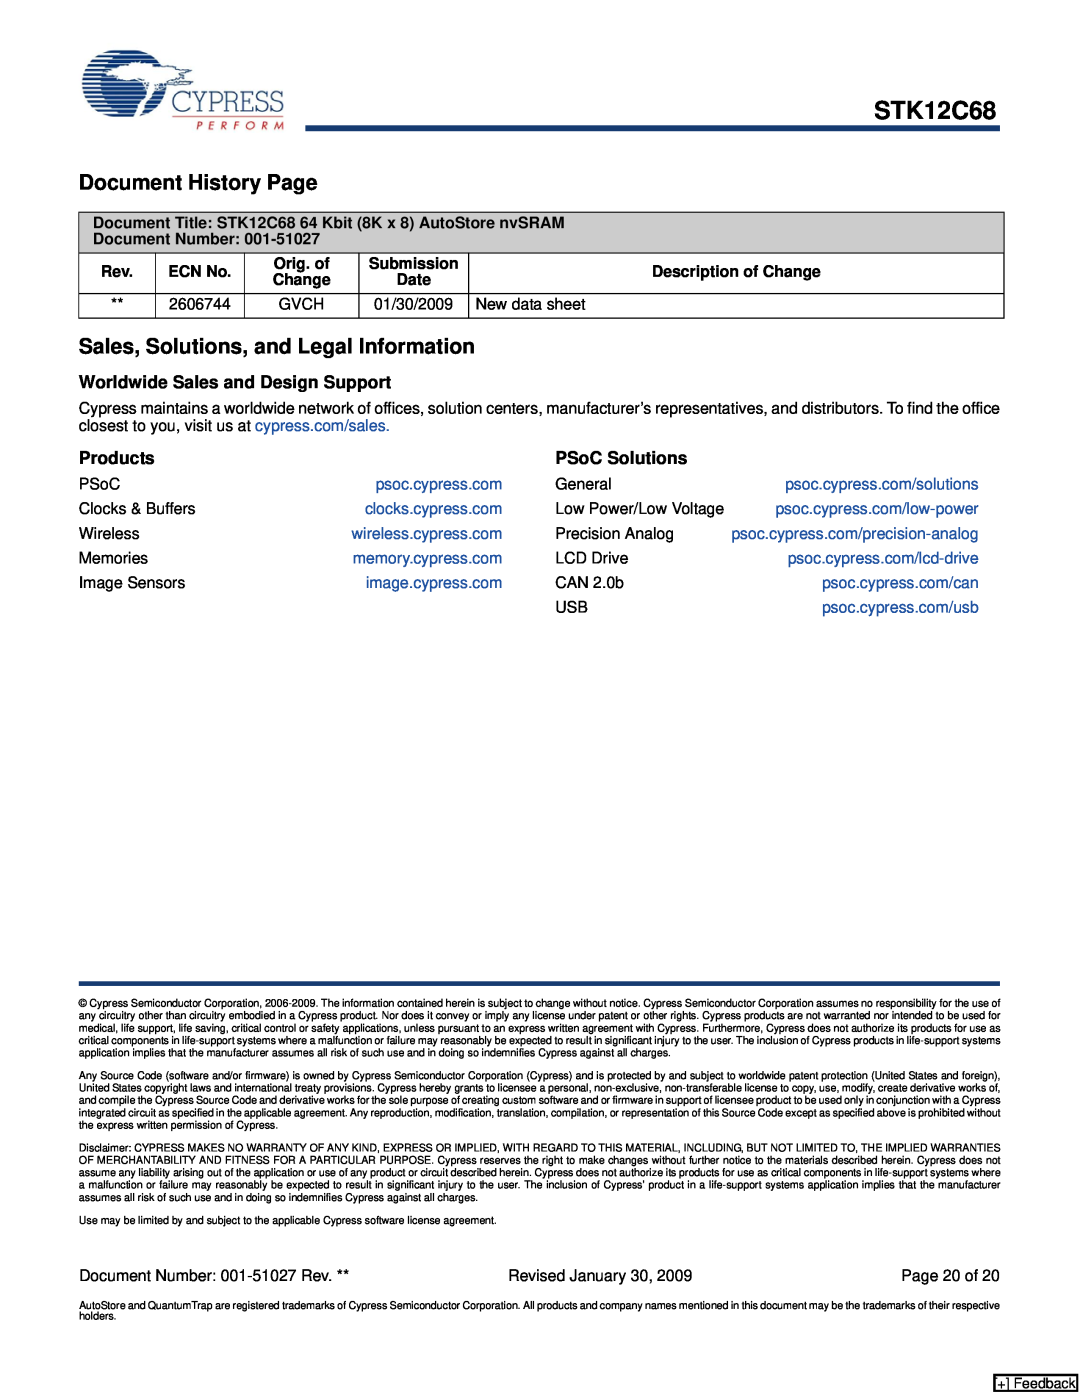 Cypress STK12C68 manual Document History Page, Sales, Solutions, and Legal Information, Worldwide Sales and Design Support 